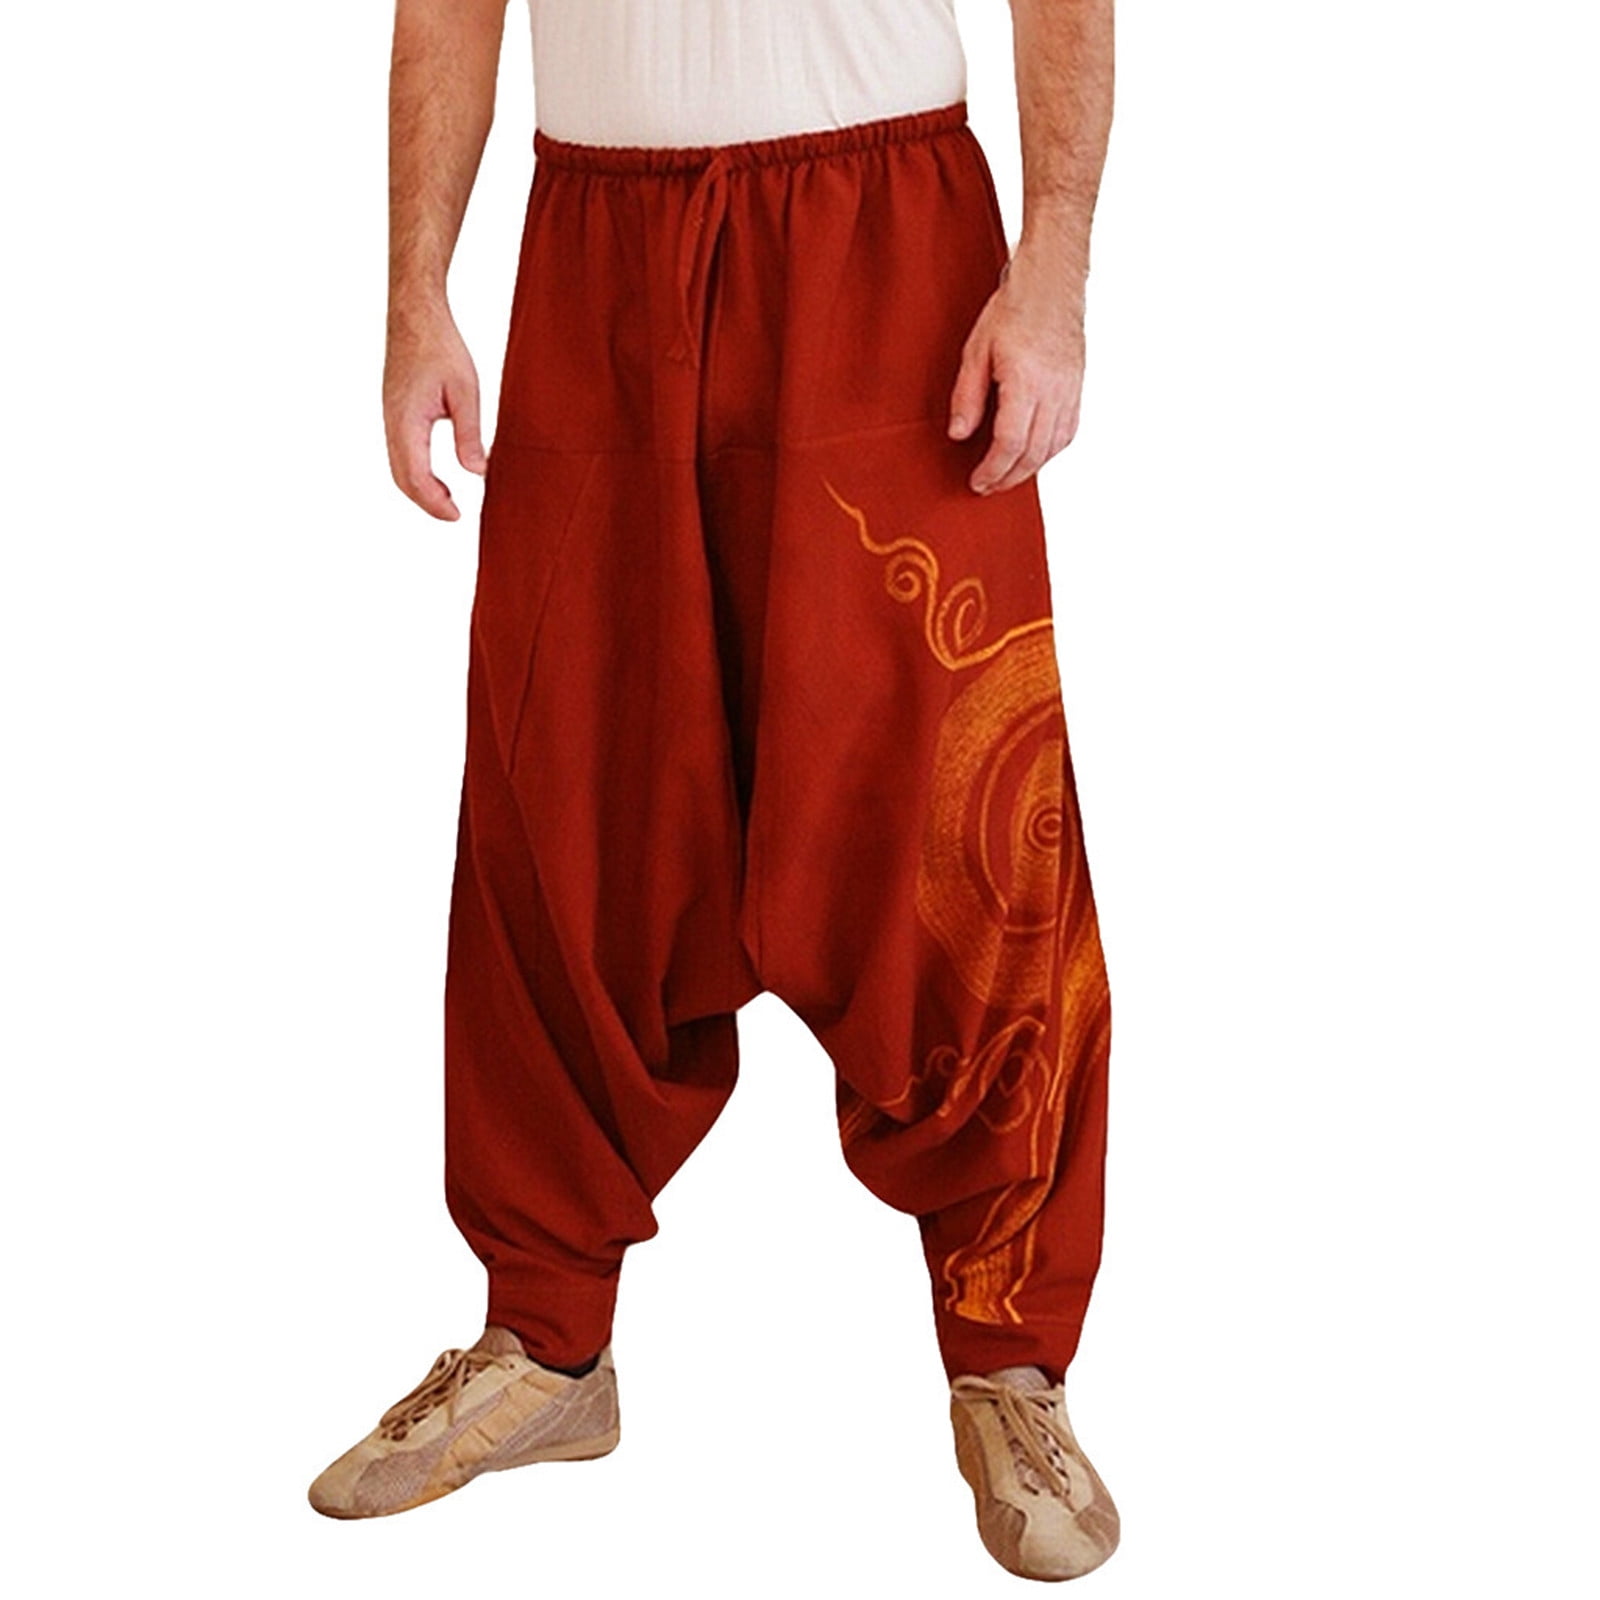 Tuphregyow Men's Thai Fisherman Pants Shiny Elastic Comfy Pants Perfect for  Yoga, Martial Arts, Pirate, Medieval, Japanese Pantalones Sweatpants Loose  Lightweight with Pockets Print Red M 